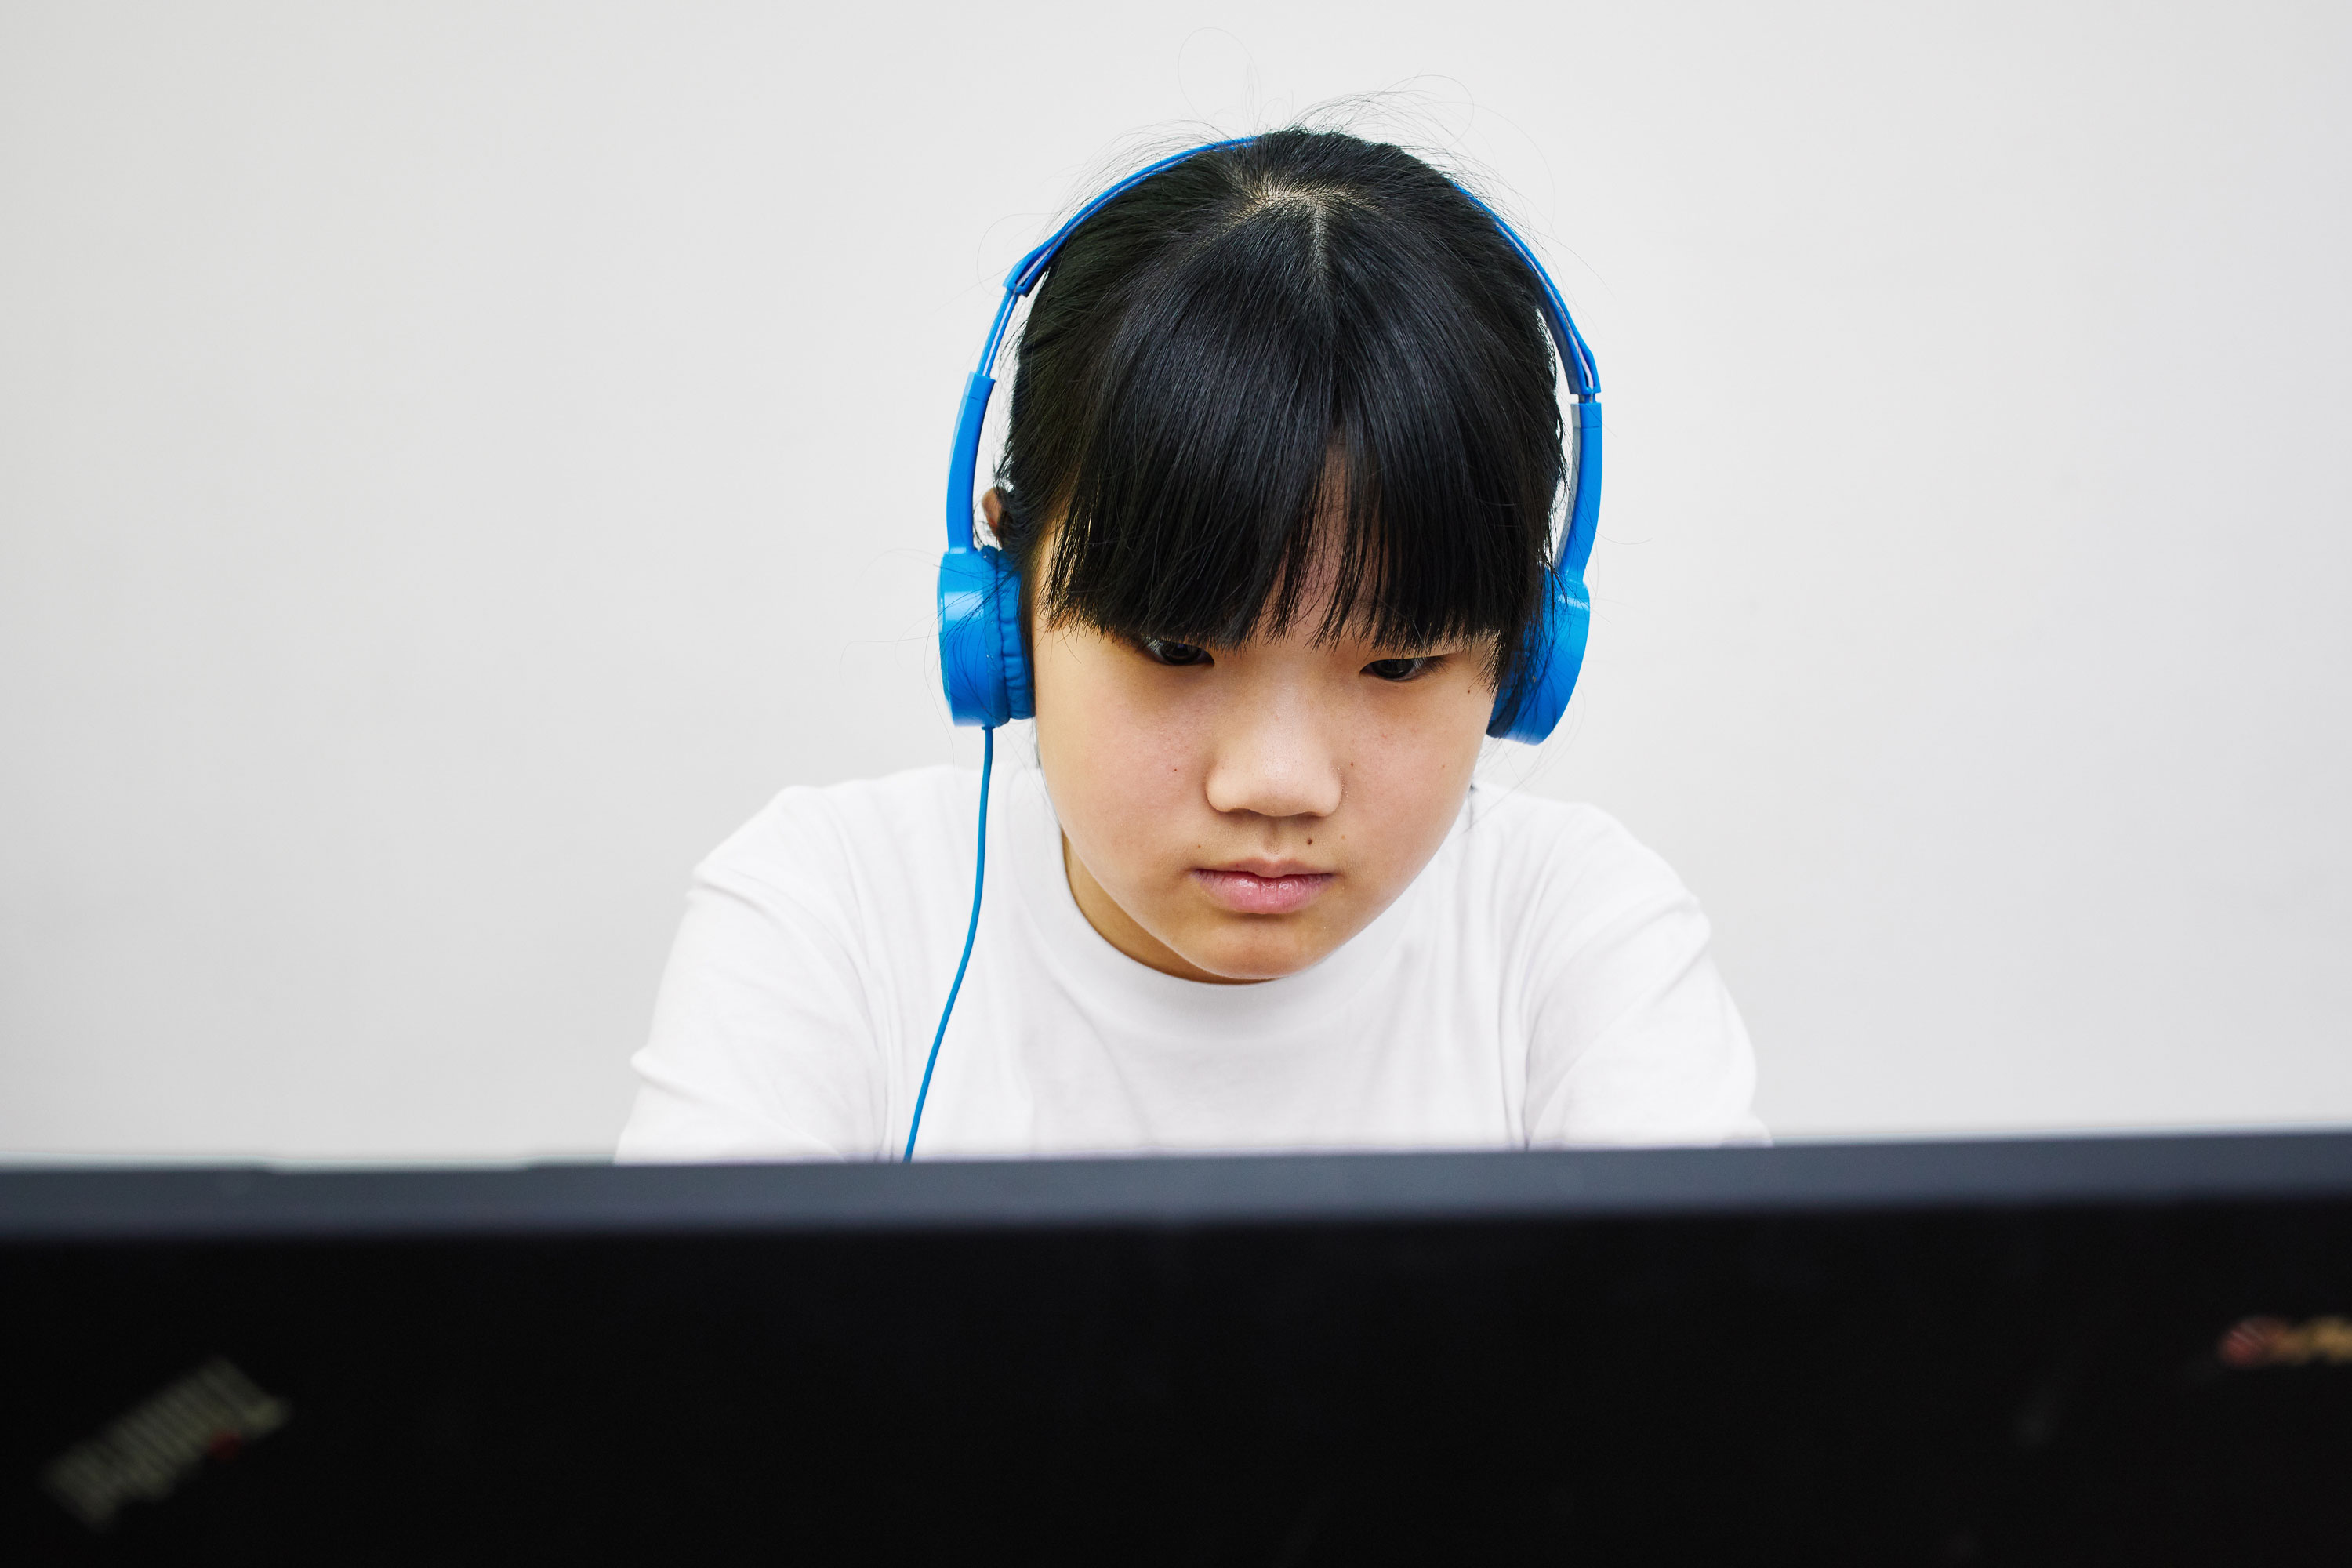 Student wearing headphones and looking at a computer monitor